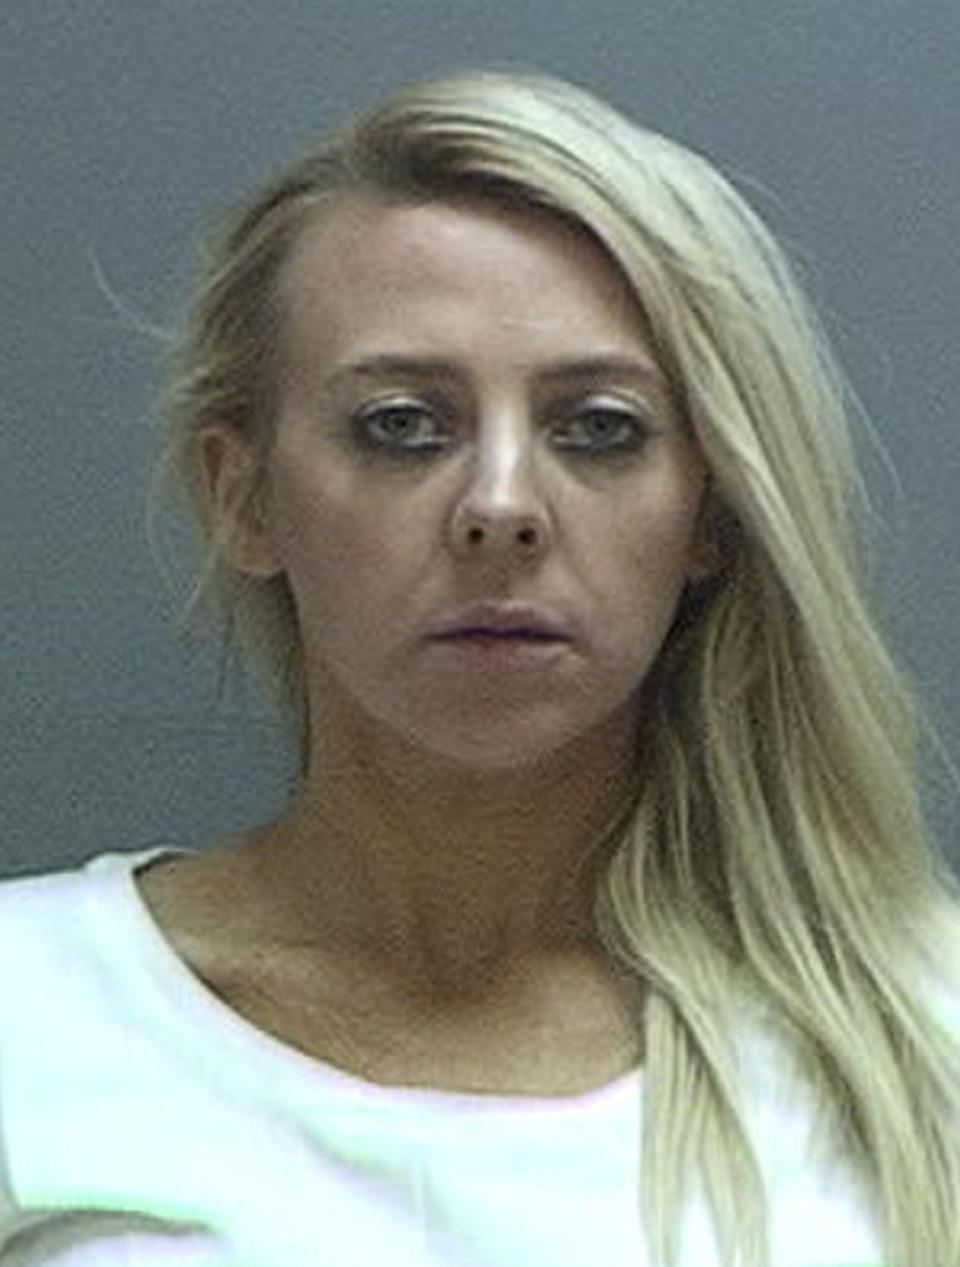 This undated photo provided by the Salt Lake County Sheriff's Office shows Chelsea Watrous Cook. Police say Cook, a Utah high school teacher, shot and killed her ex-husband's girlfriend while the former couple's children looked on. (Salt Lake County Sheriff's Office via AP)